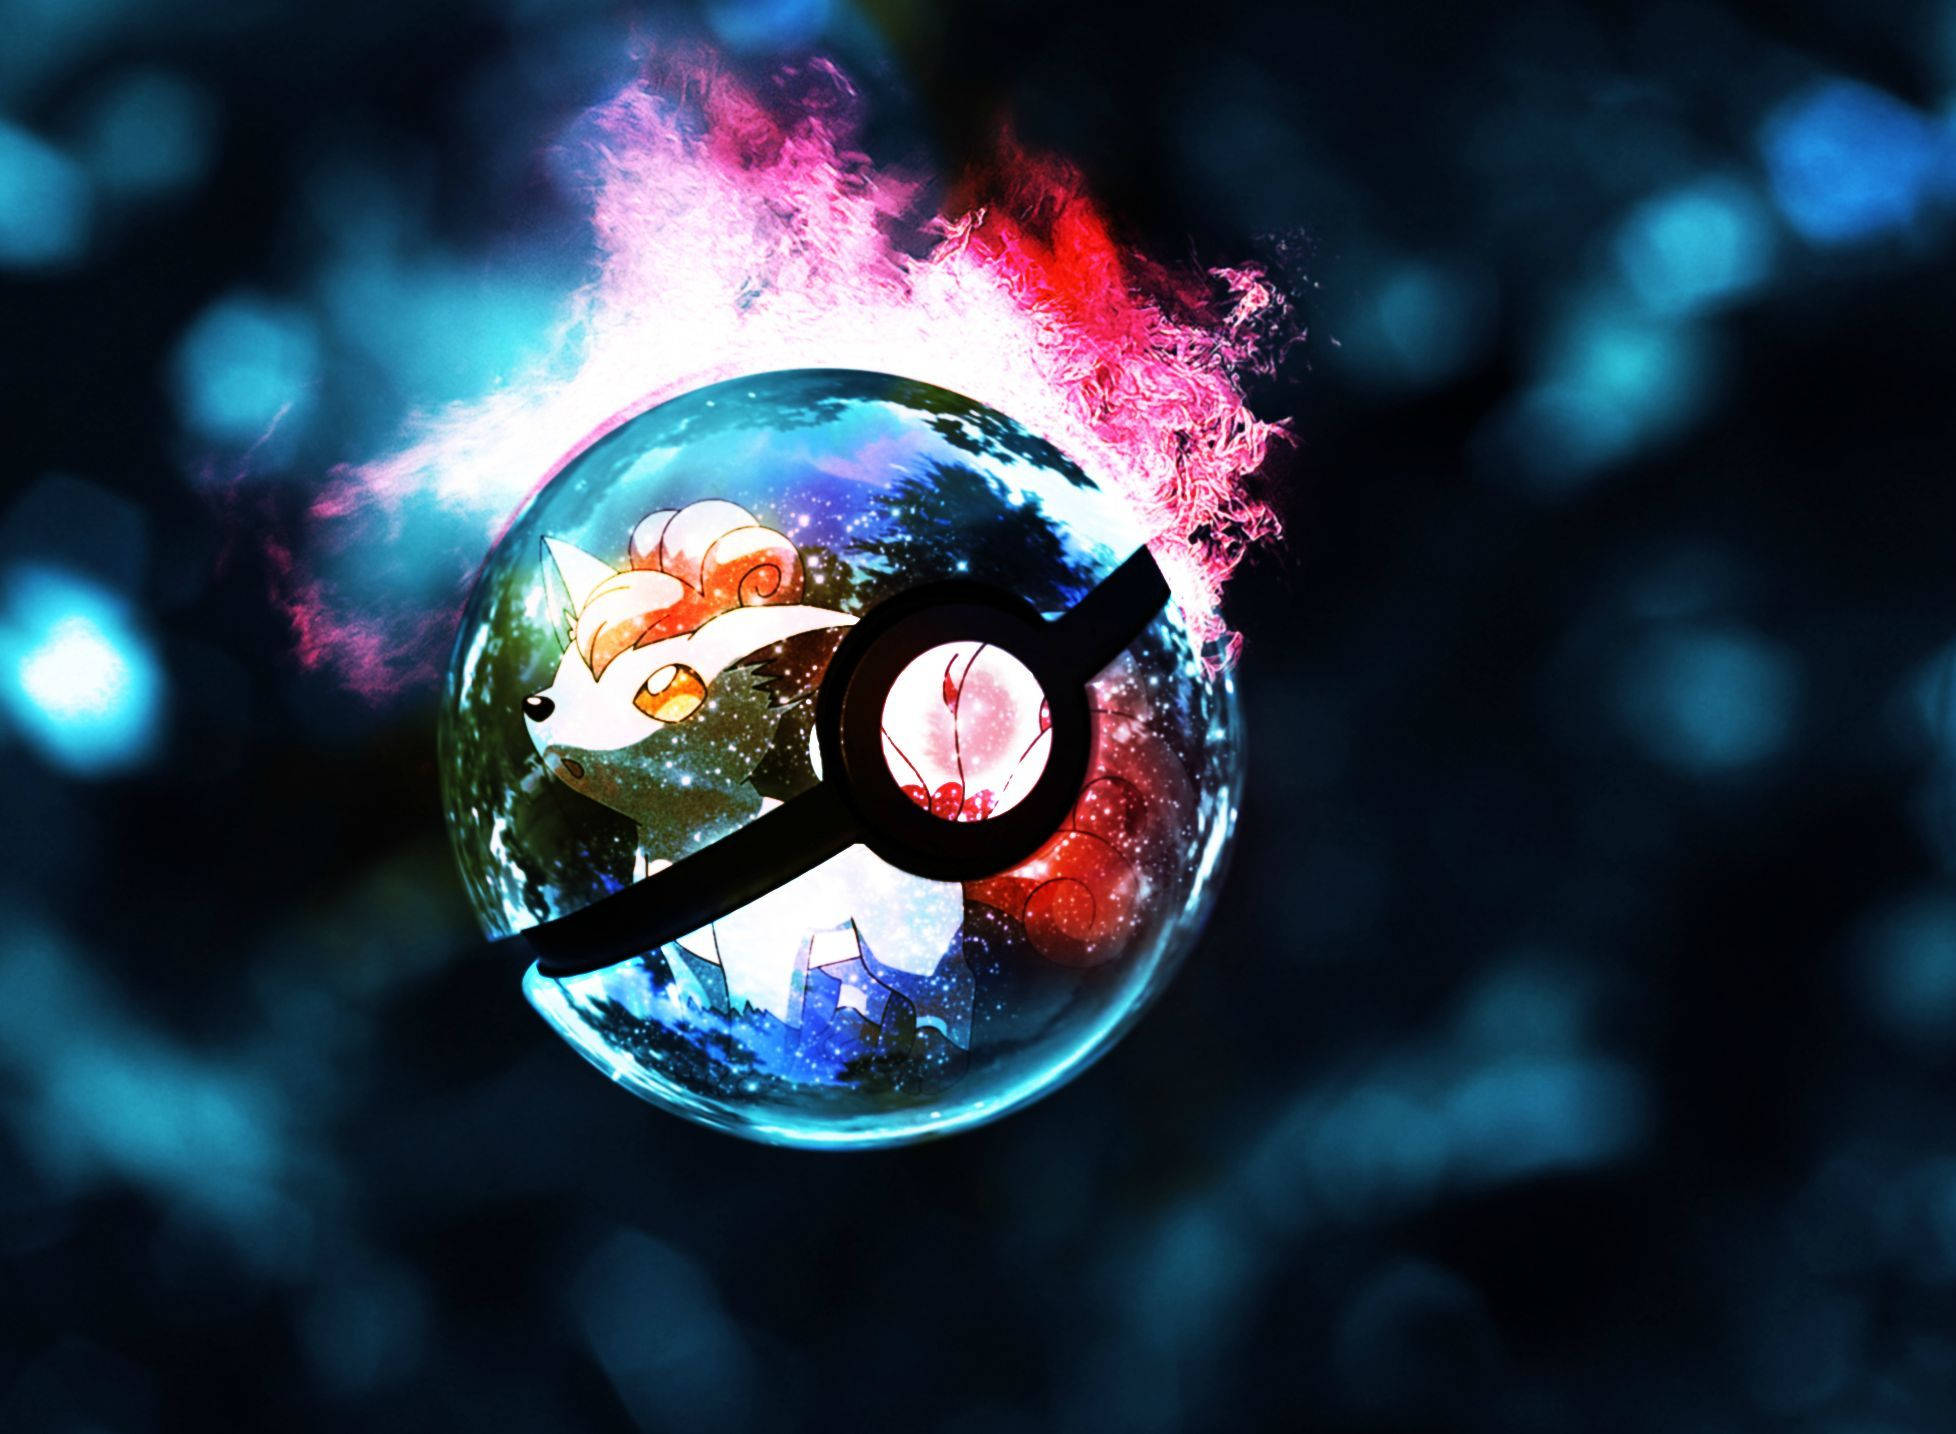 Cool Pokemon Ball Tablet Background